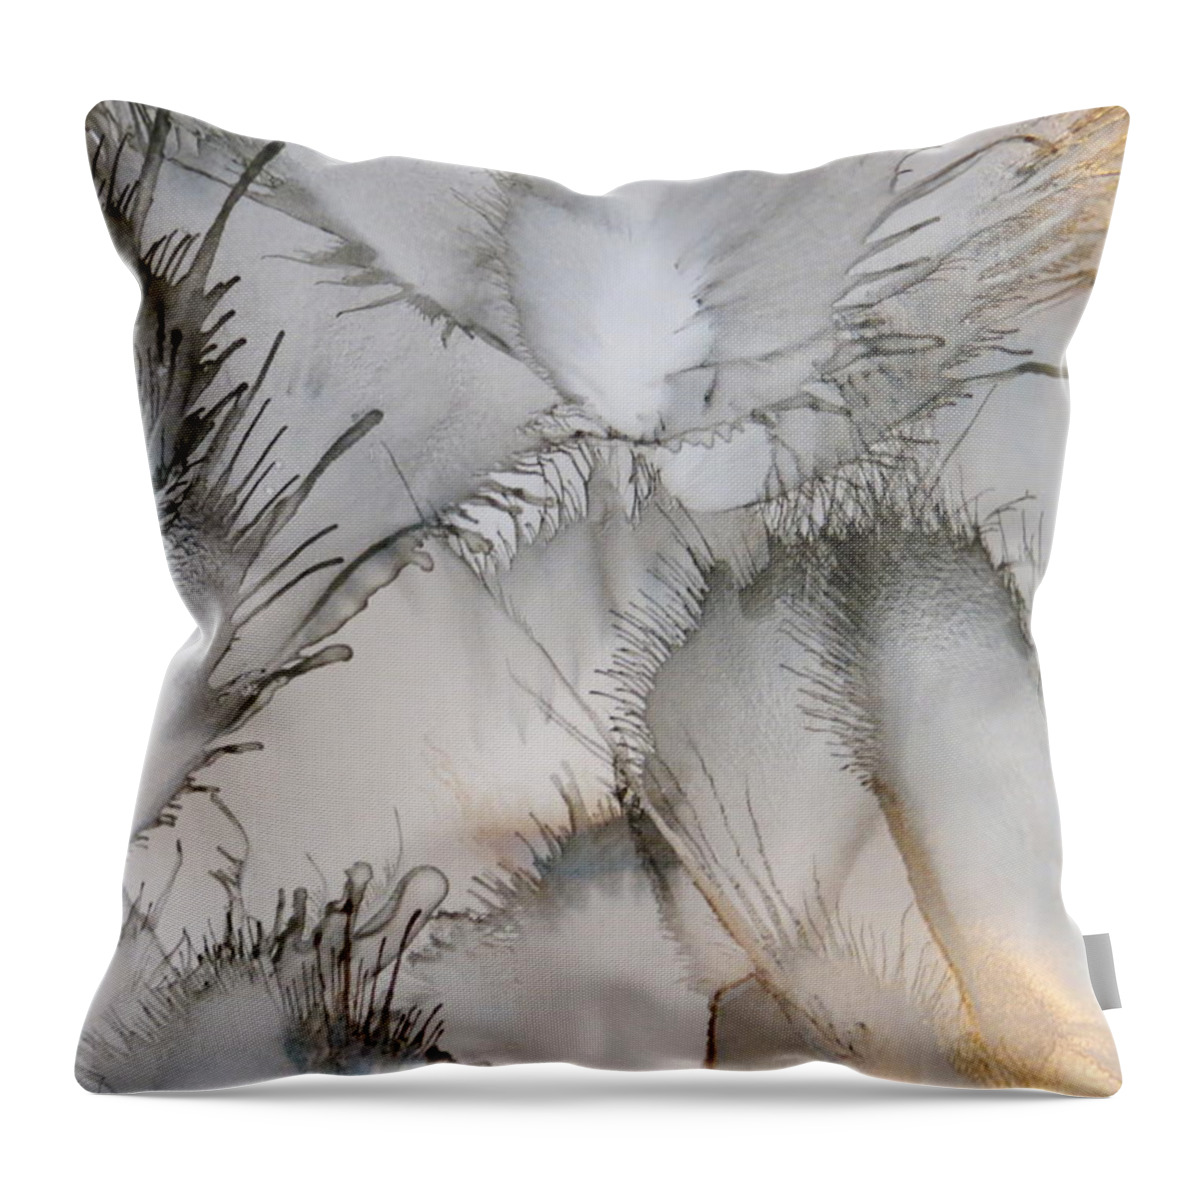 Abstract Throw Pillow featuring the painting Vision by Soraya Silvestri